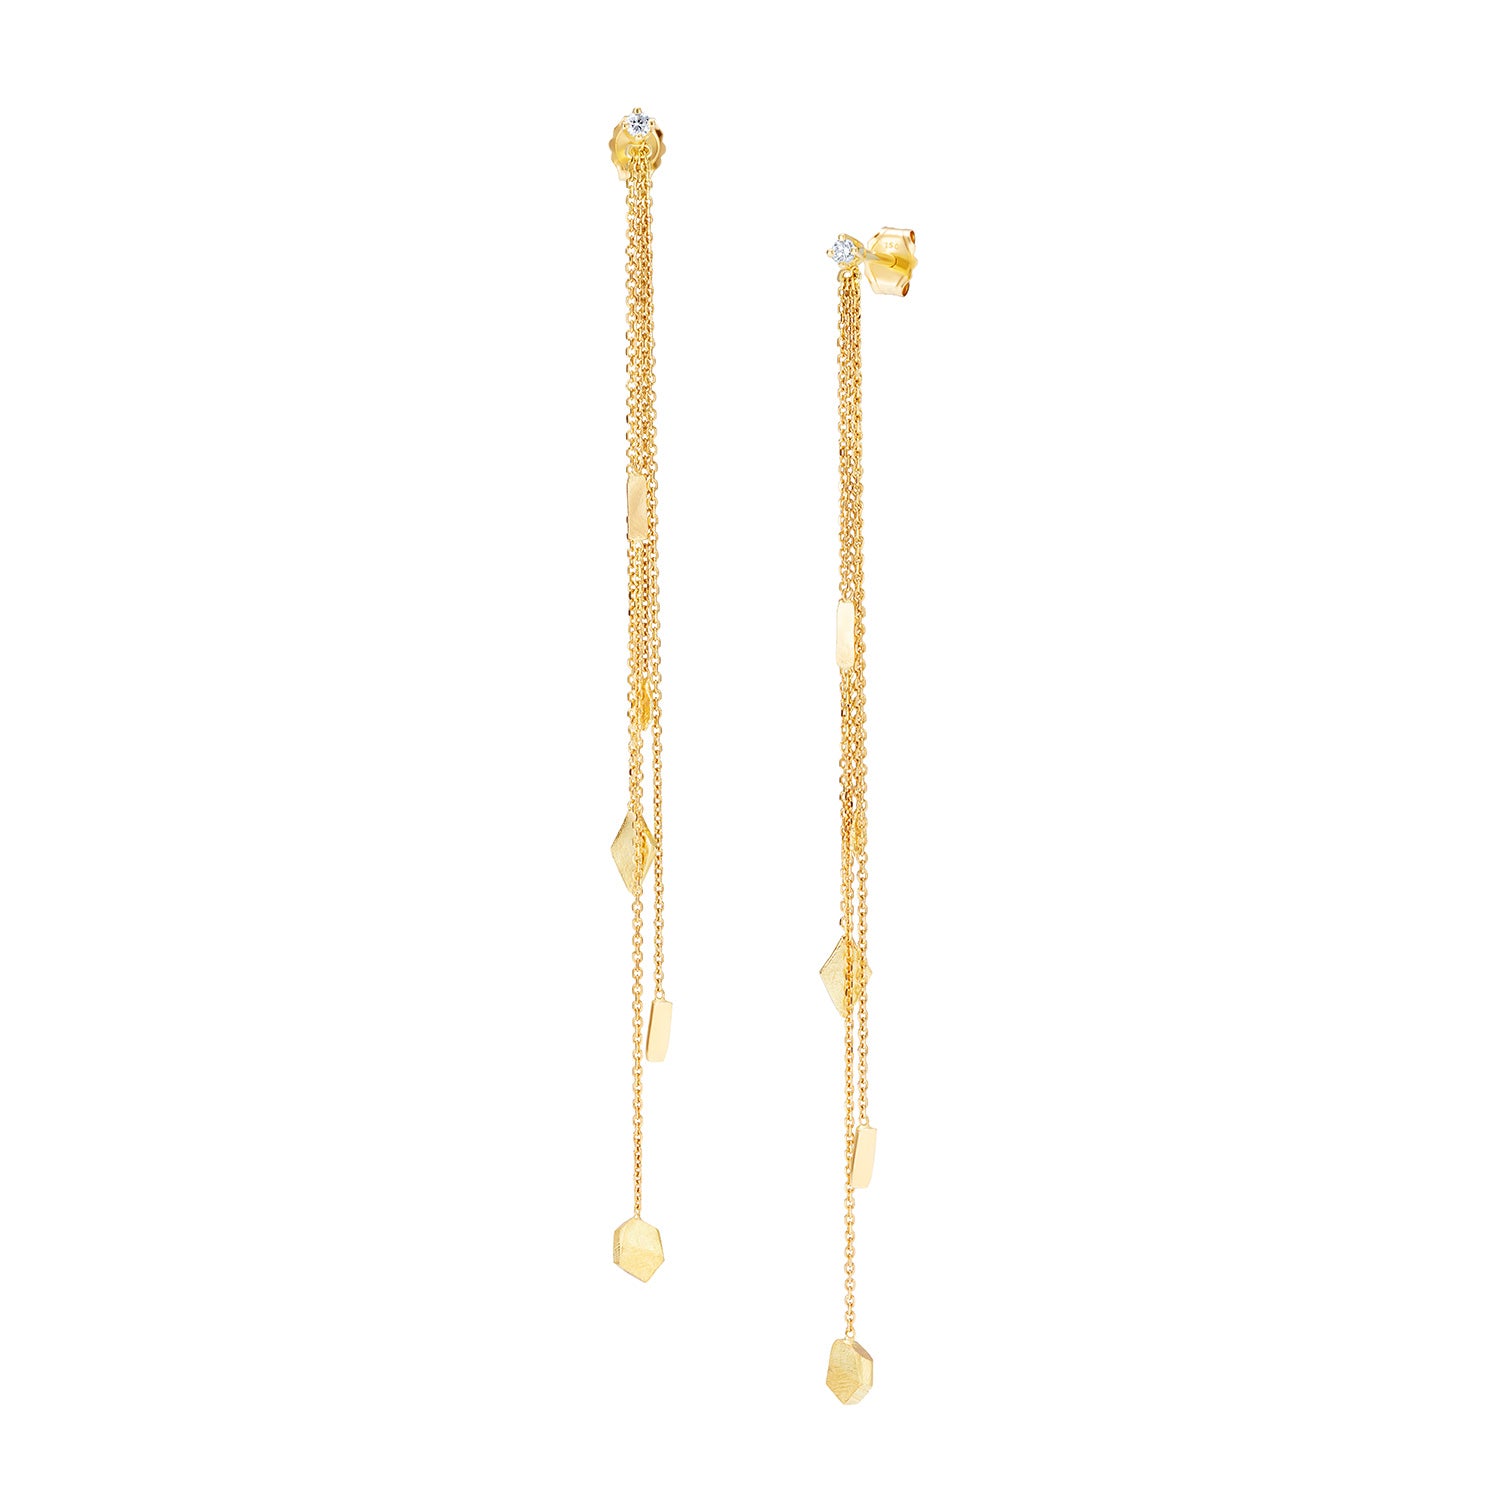 Showroom of 18k gold tops with chain hanging earrings | Jewelxy - 195956